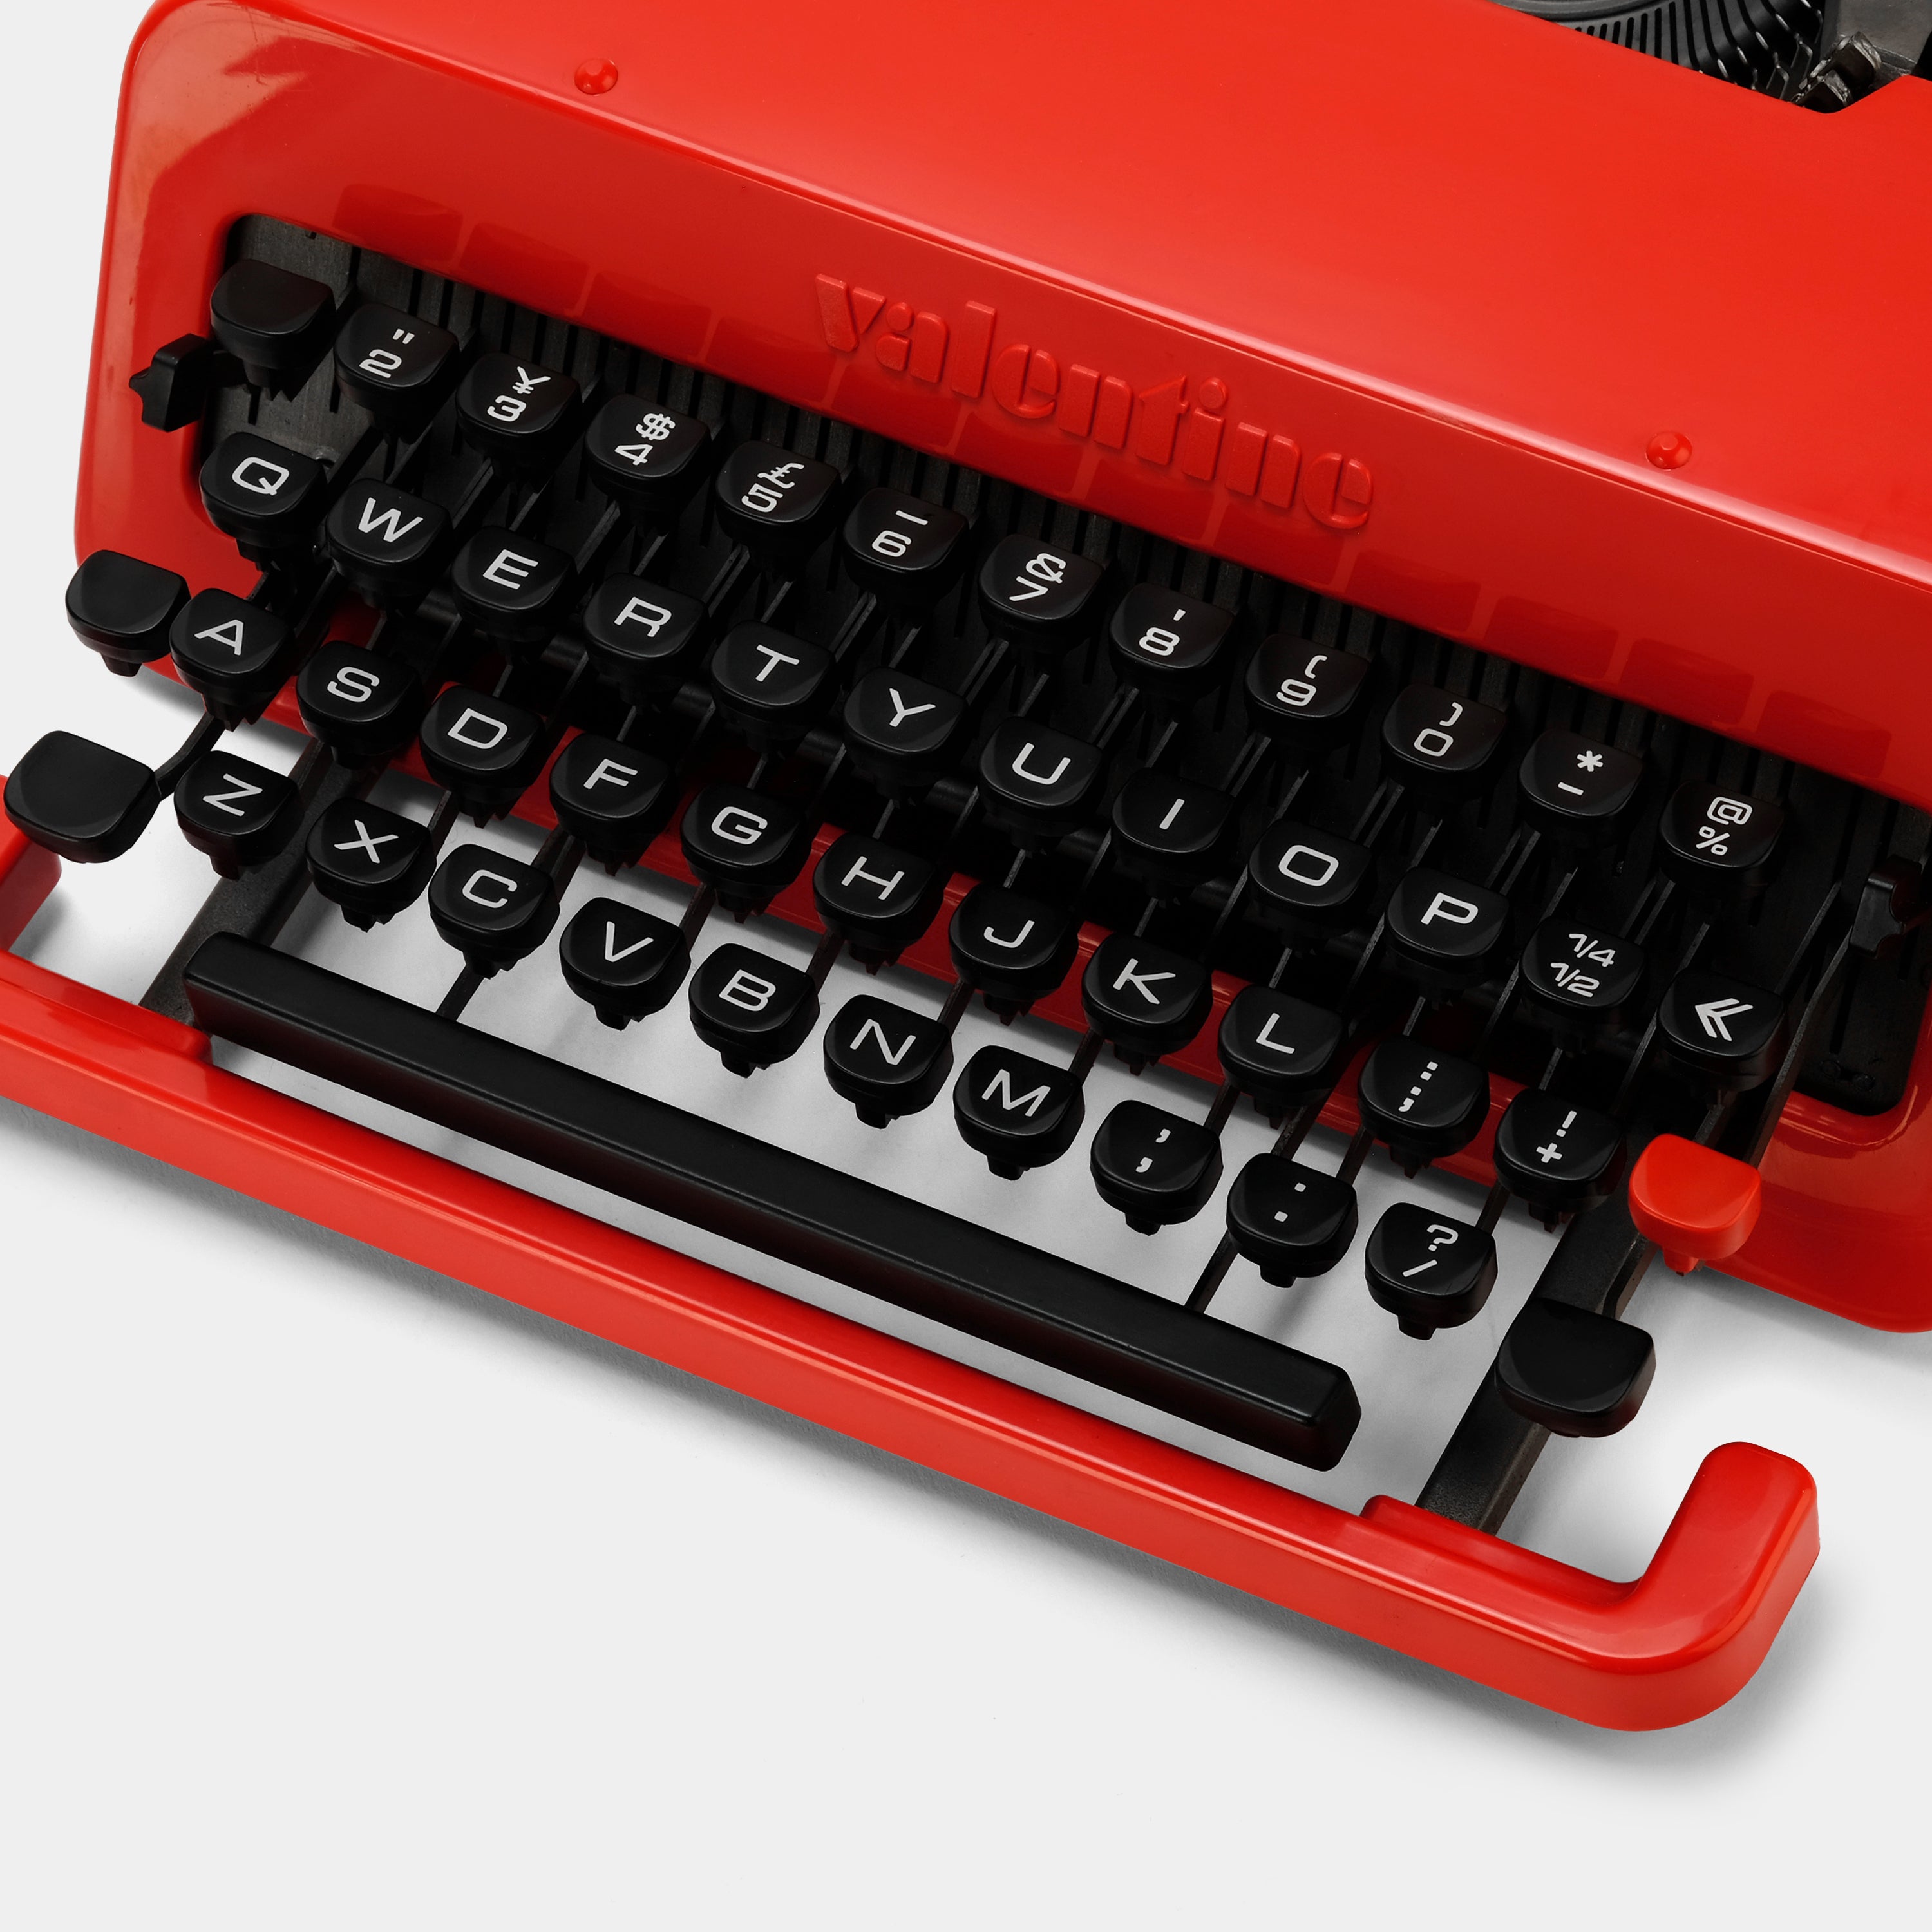 Olivetti Valentine Red Manual Typewriter with Case